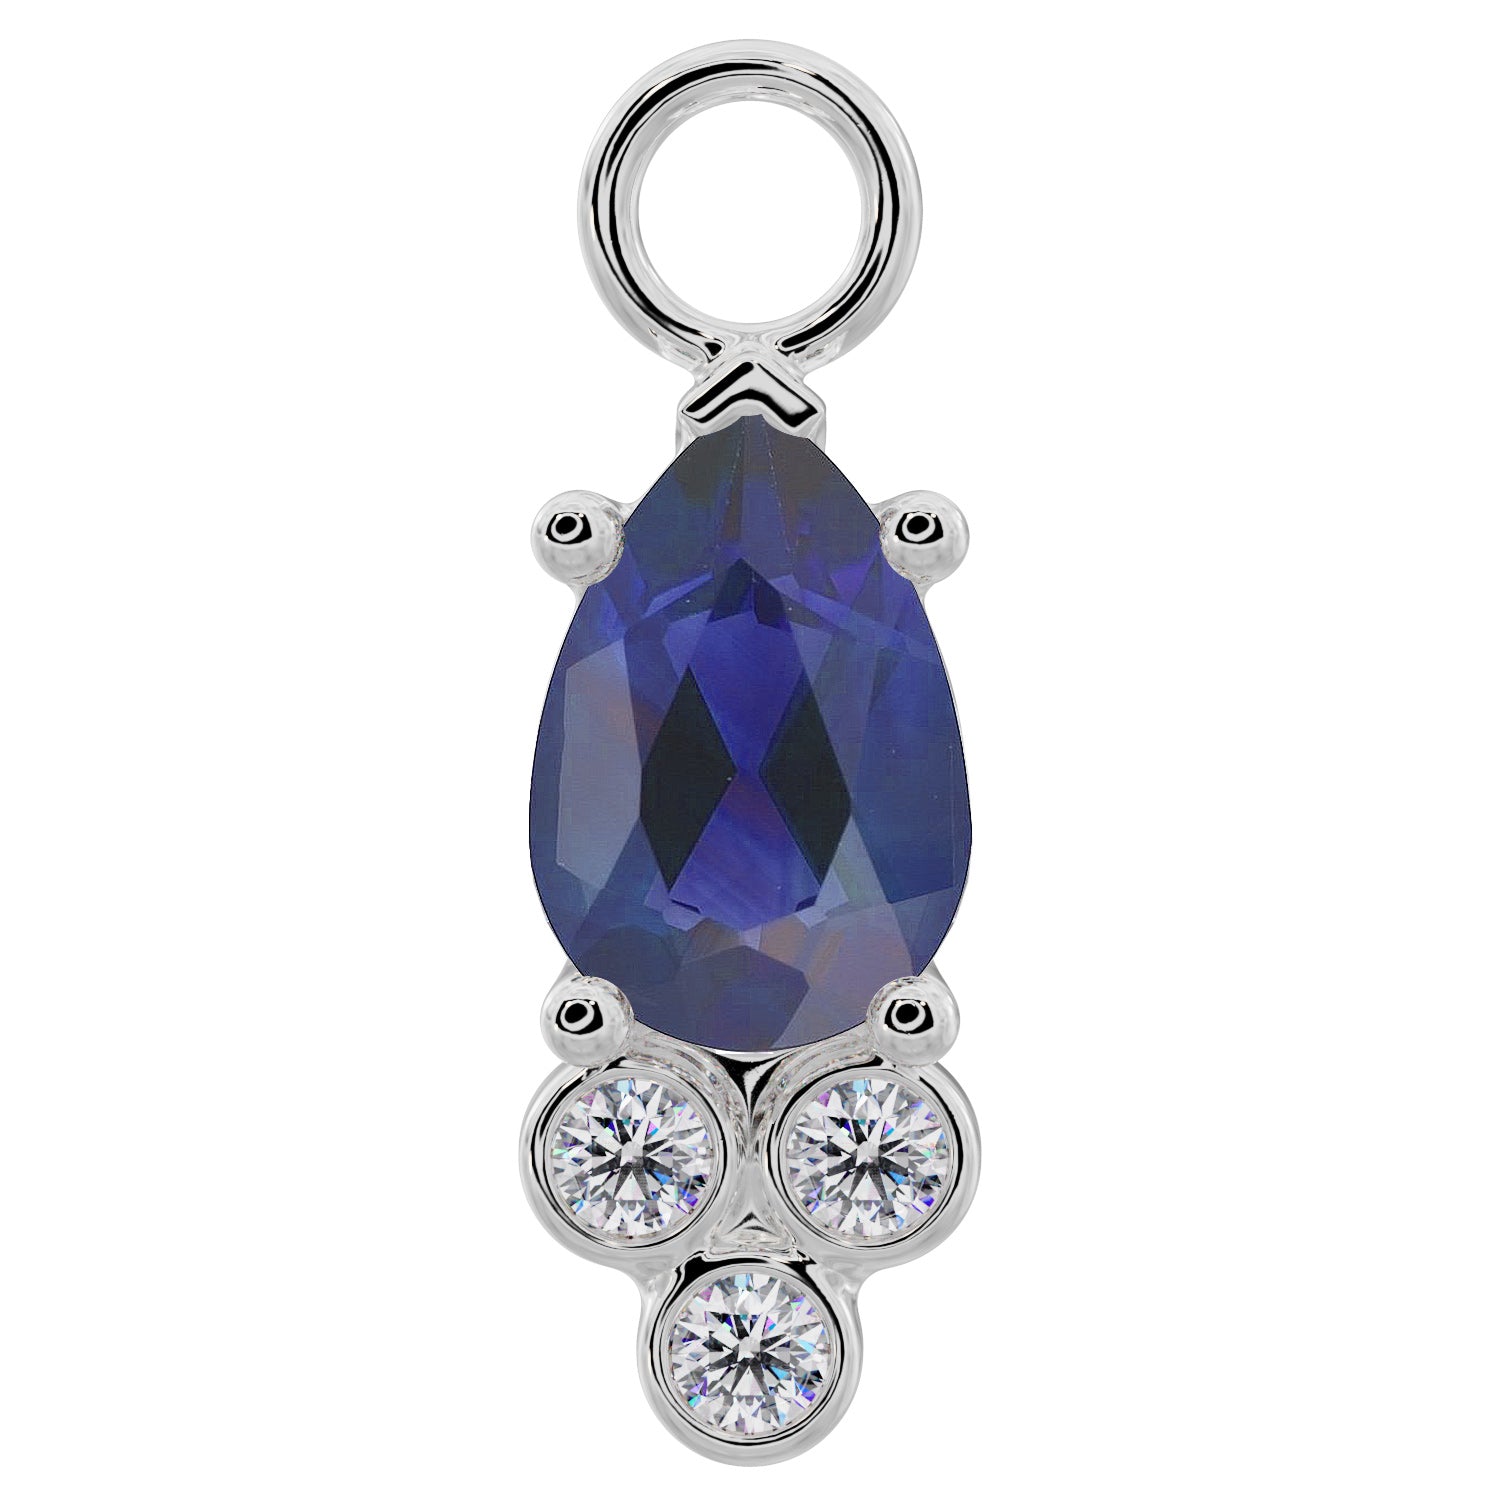 Pear with Tiny Diamonds Charm Accessory for Piercing Jewelry-Blue Sapphire   950 Platinum